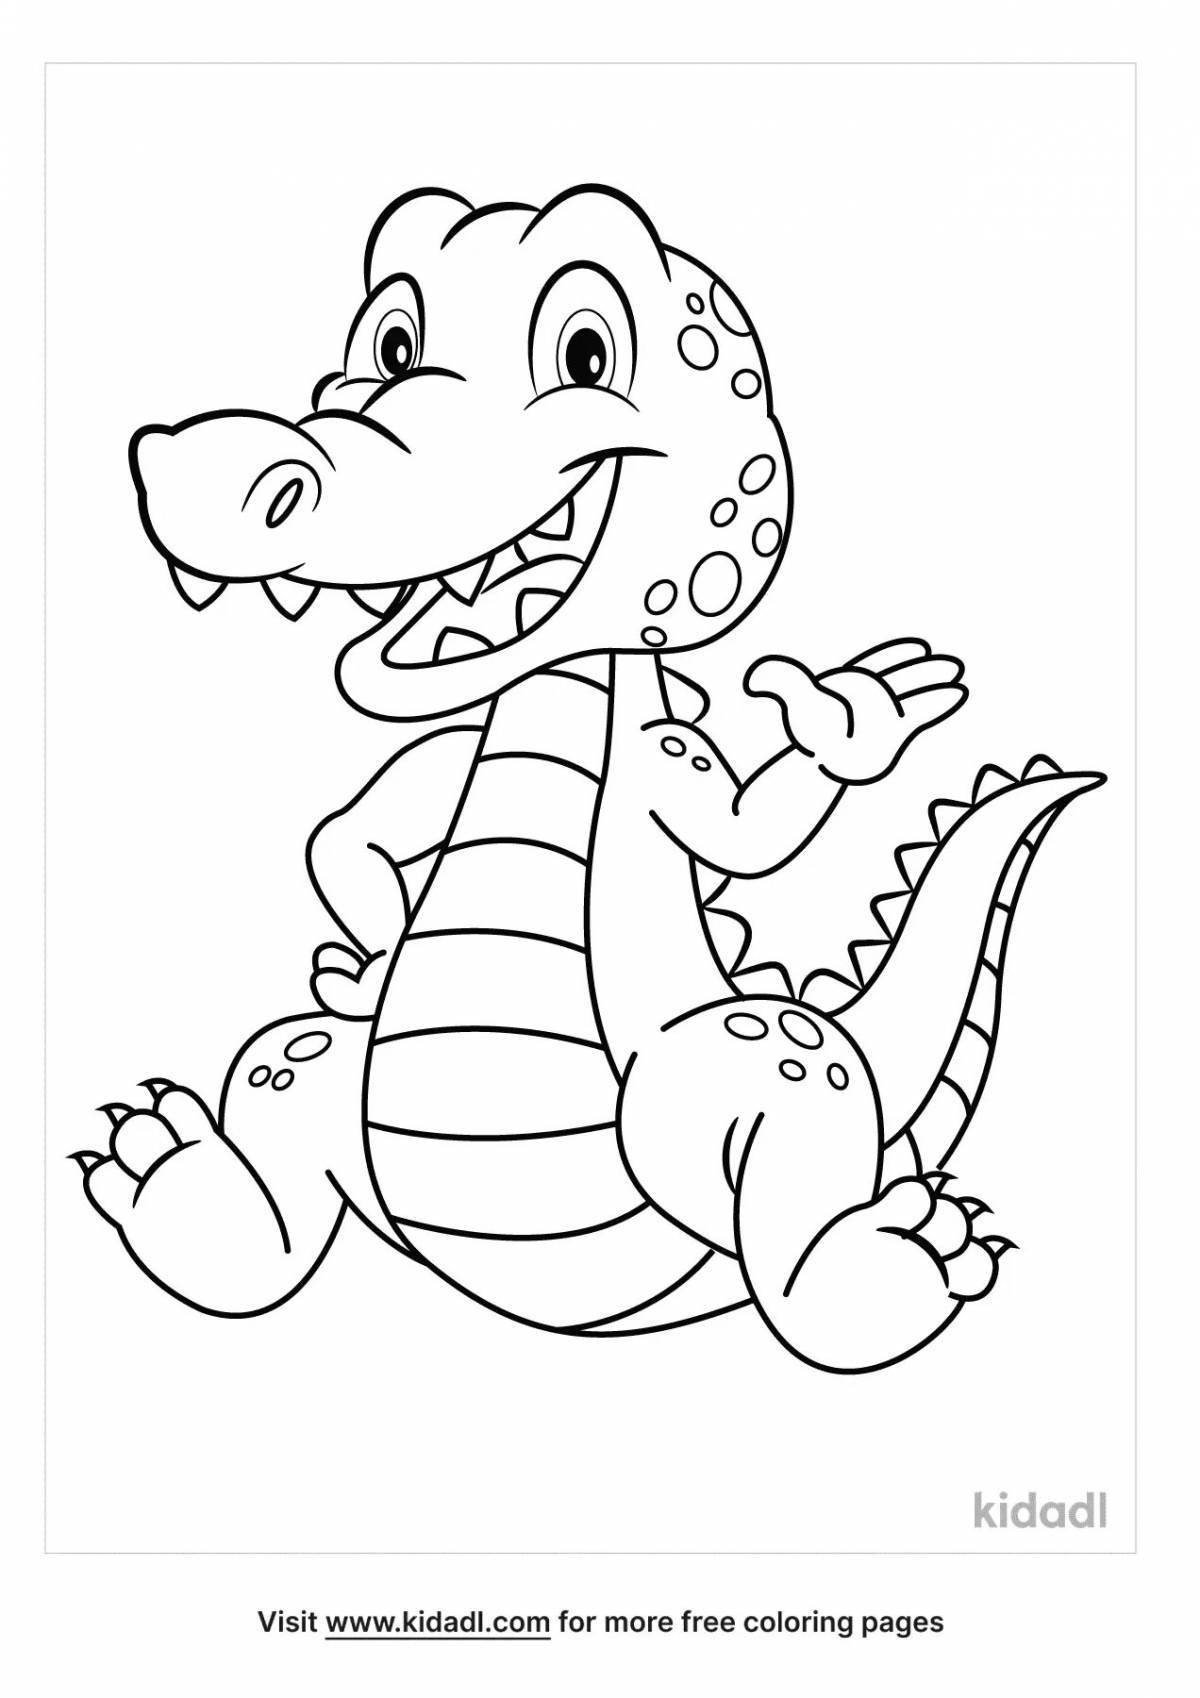 Exciting coloring crocodile monty